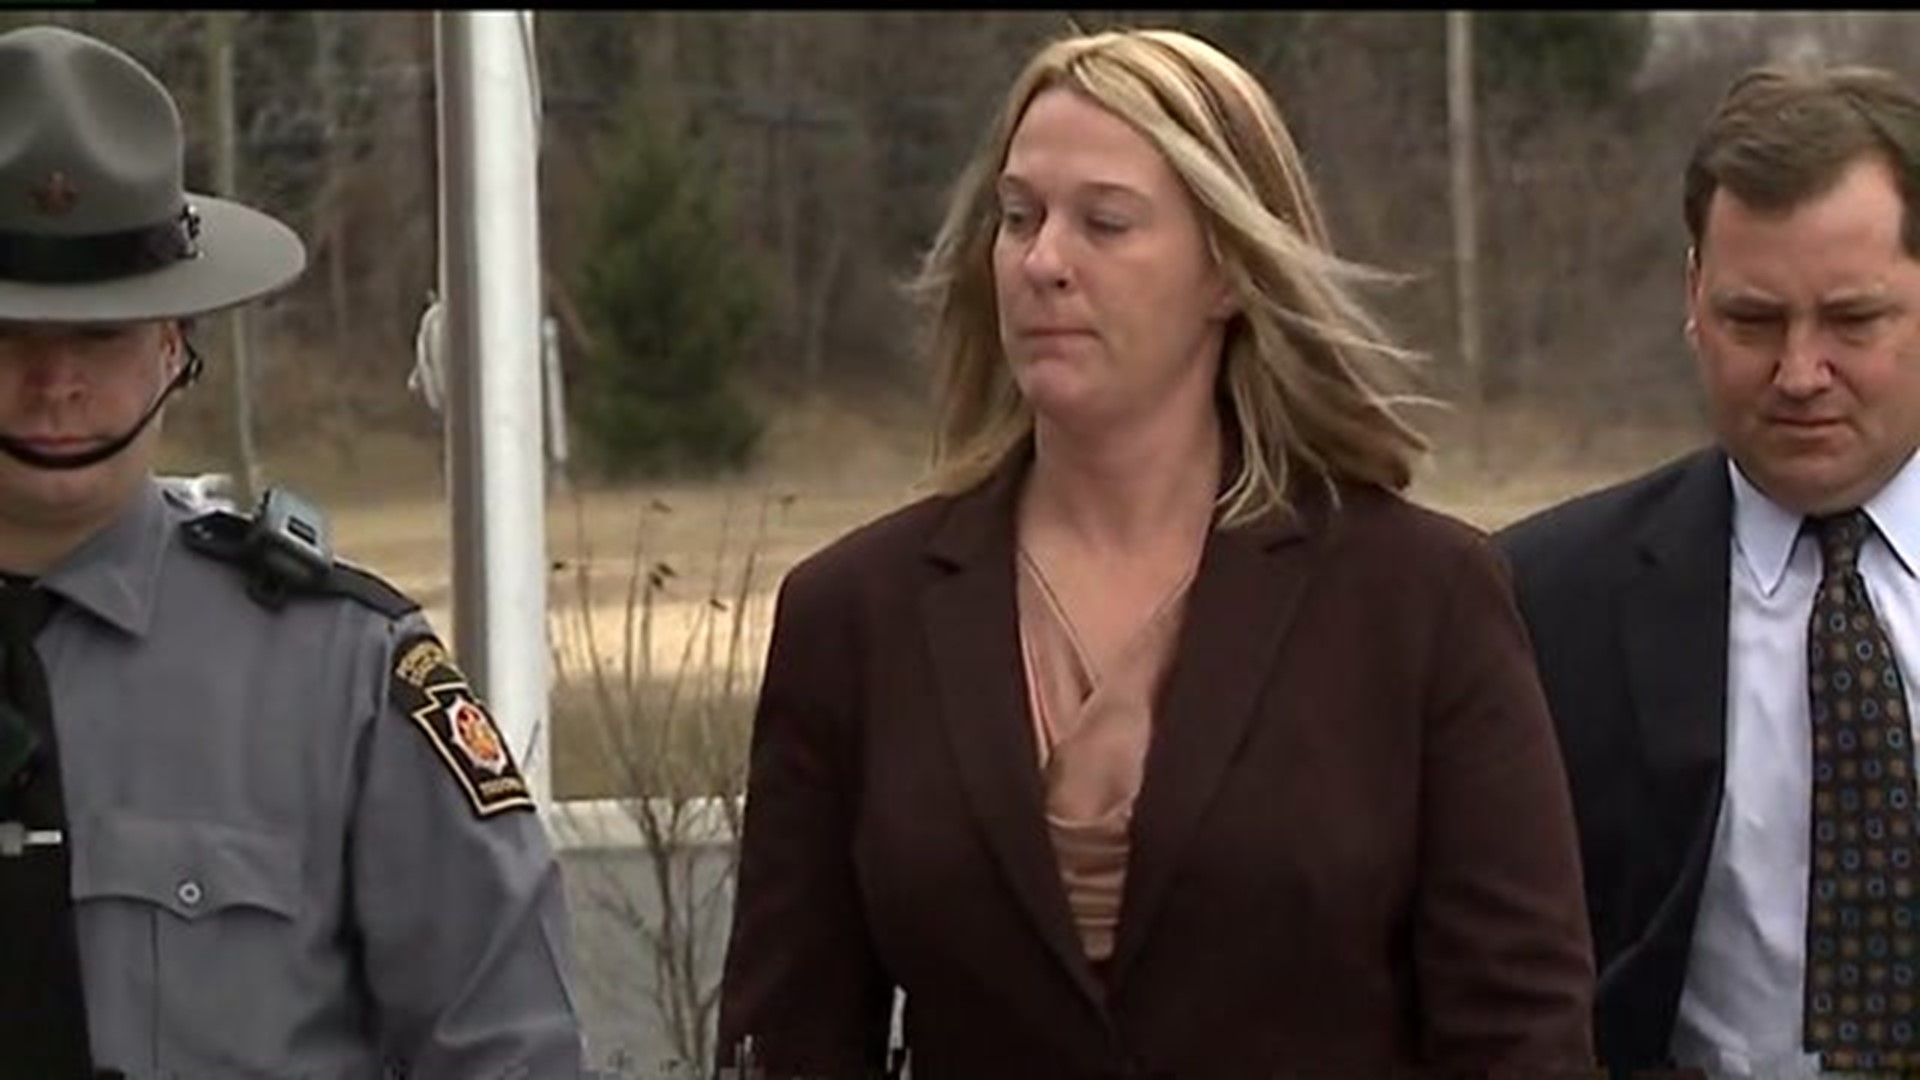 Hummelstown police officer charged with criminal homicide